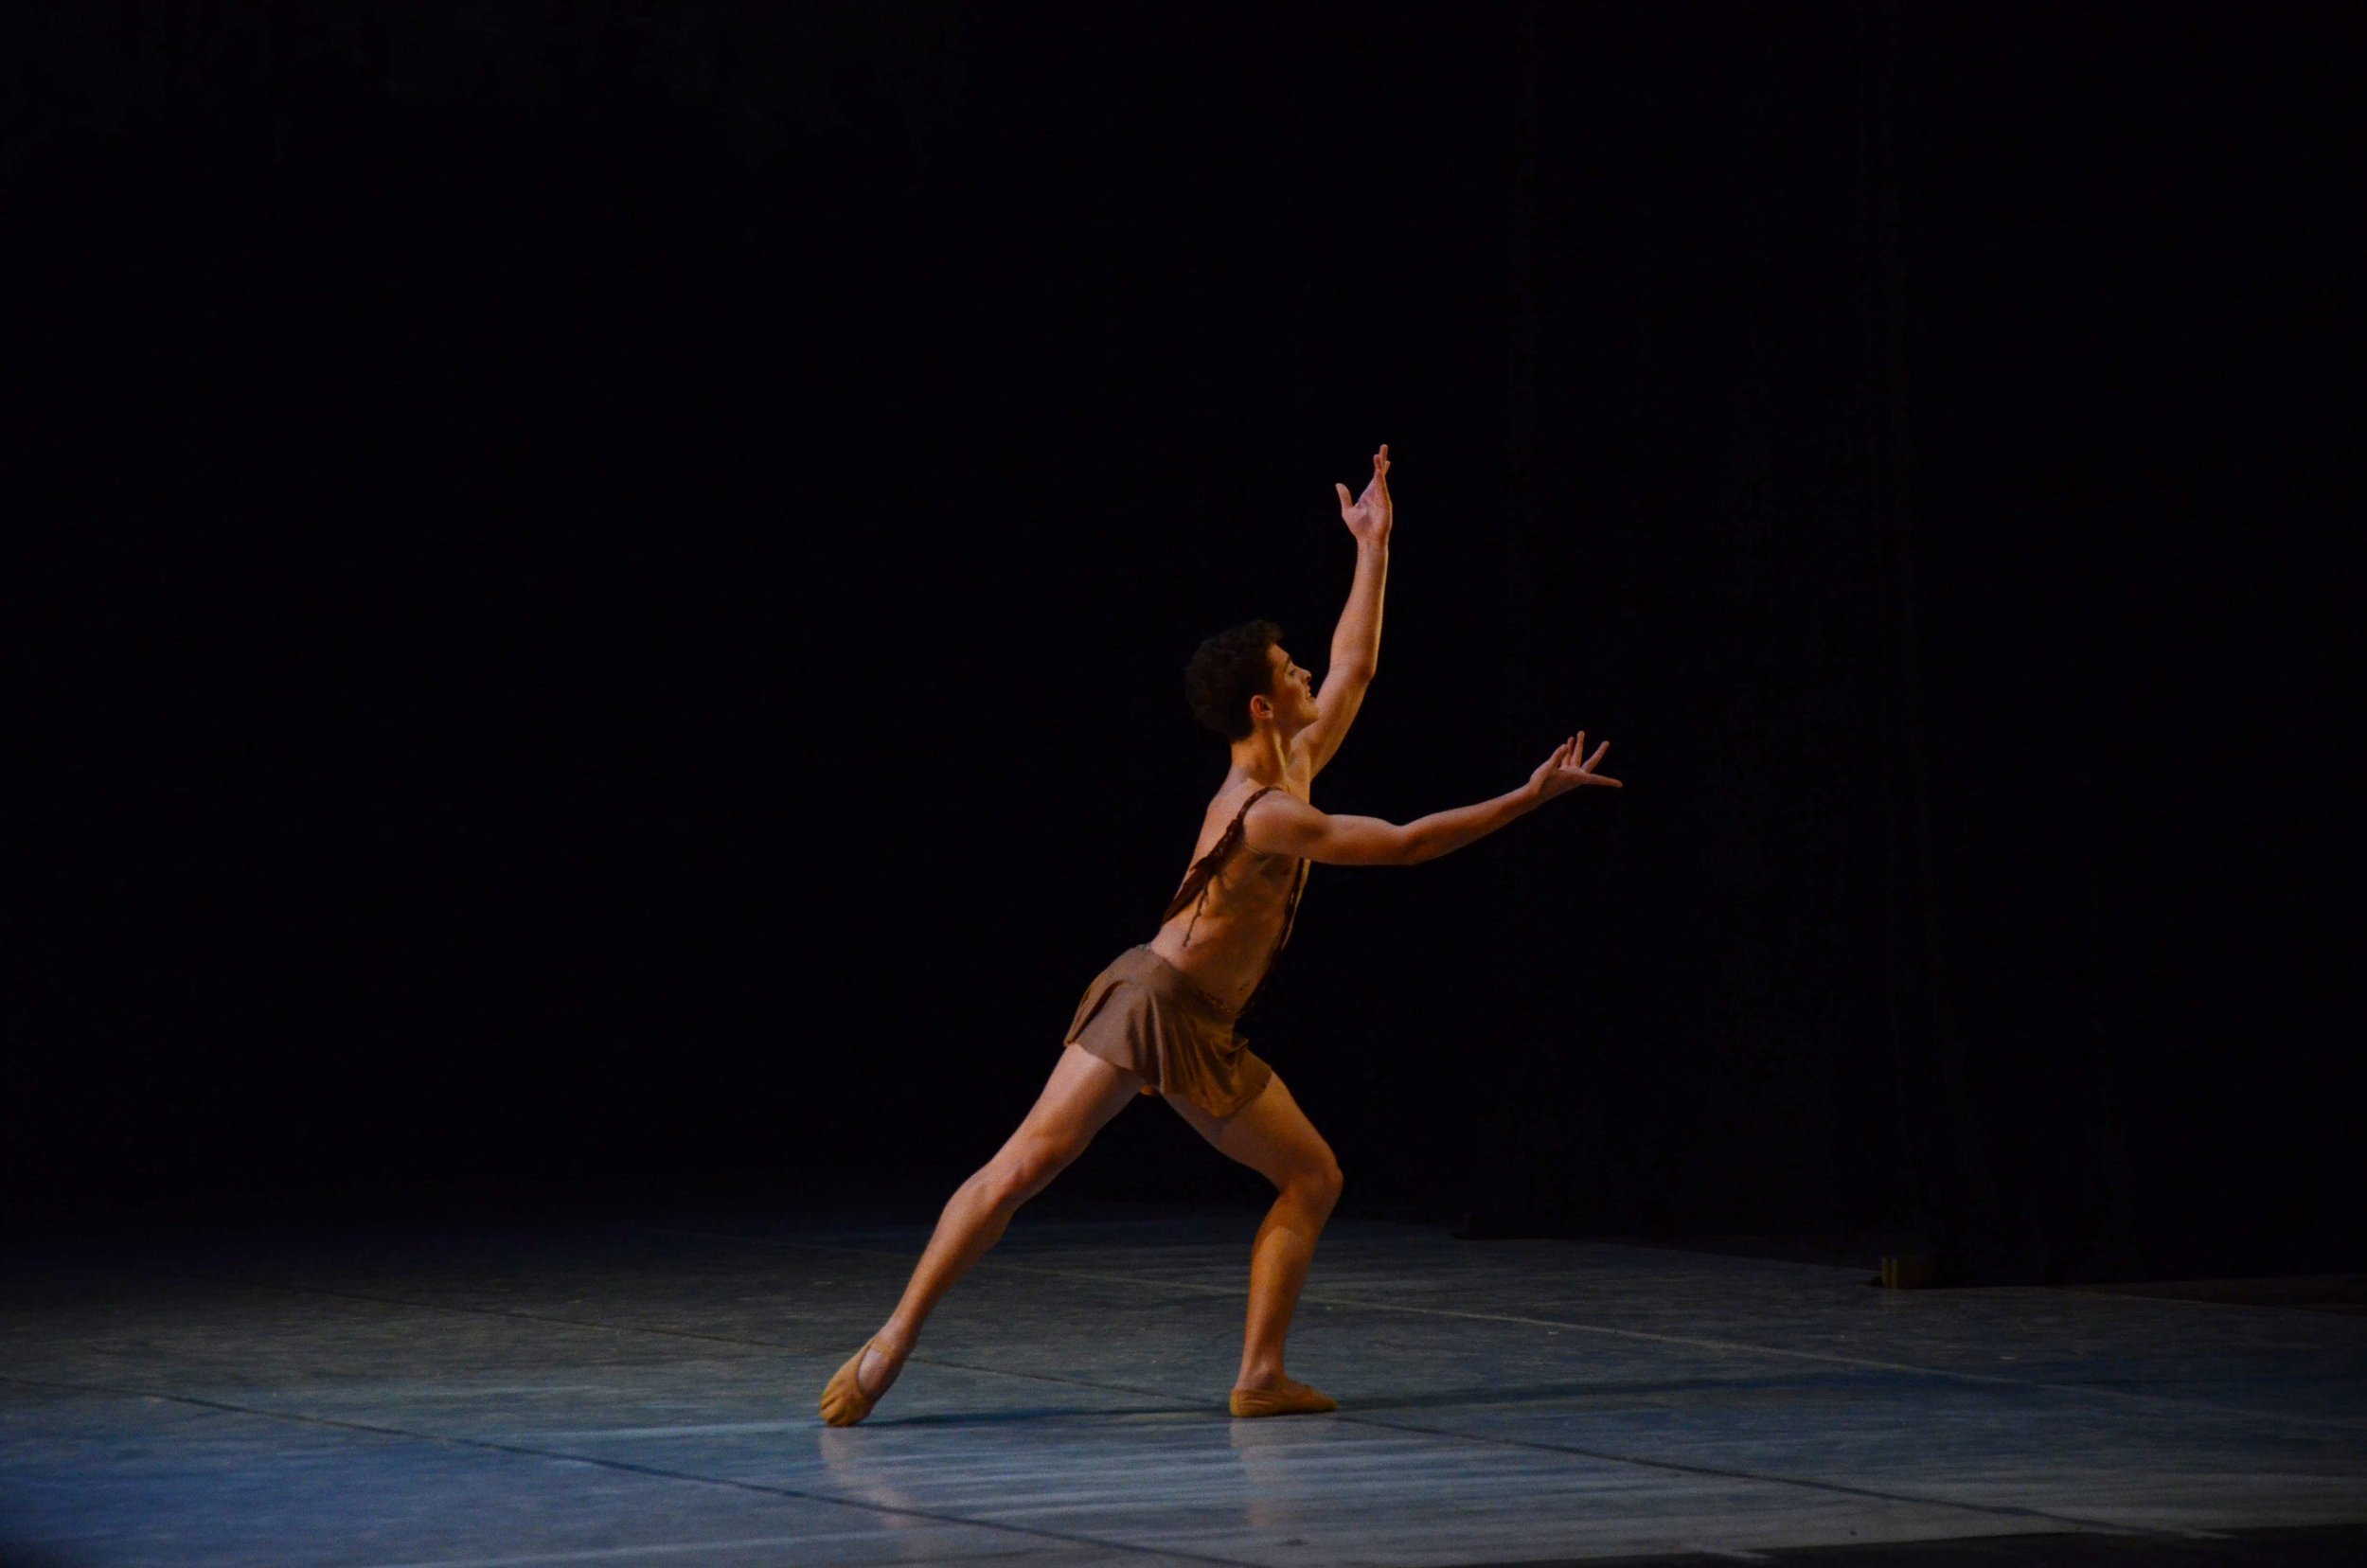 Alexis+performing+at+the+National+Ballet+School+of+Cuba+©+Indyca.jpg